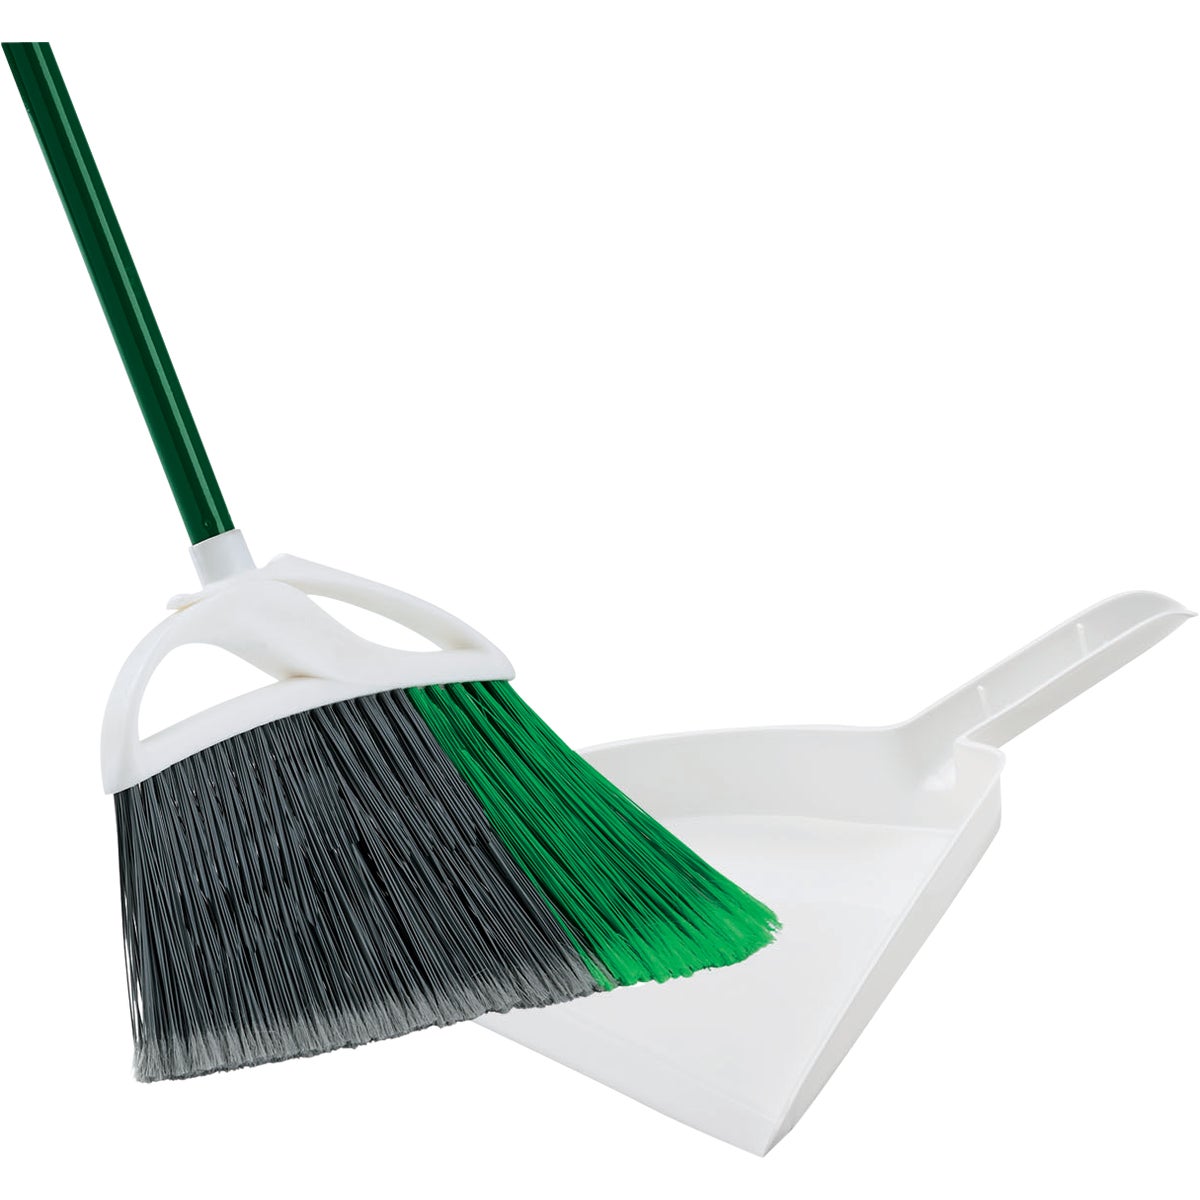 Libman 13 In. W. x 54 In. L. Steel Handle Large Precision Angle Broom with Dustpan